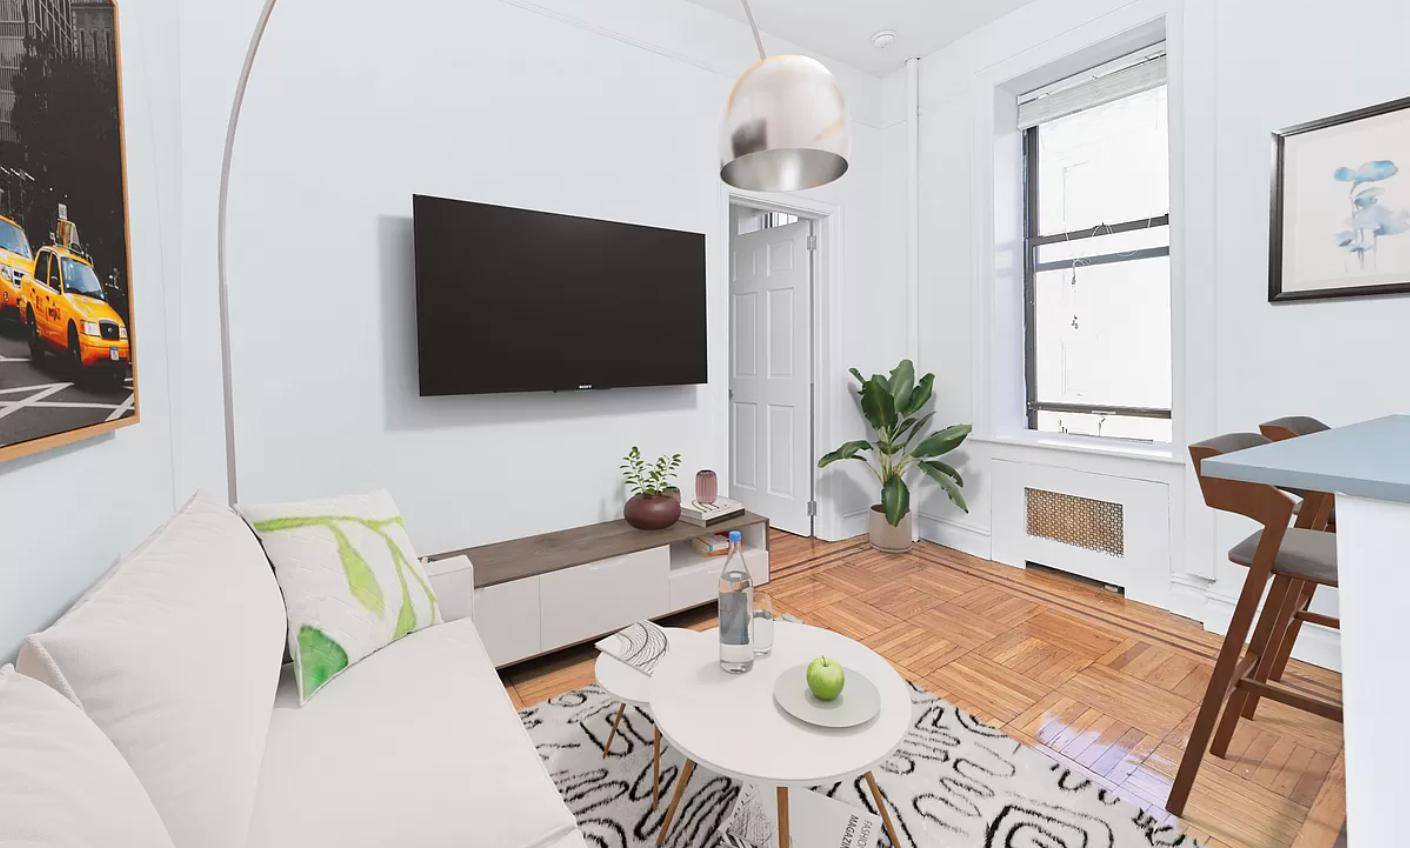 JUST LISTED 1 BED RENOVATED Prime East VillageAPARTMENT DETAILS Windowed Open KitchenHigh CeilingsHardwood FloorsNatural SunlightQueen sized bedroomBUILDING amp ; AREA Charming Walk UpHeart of the East VillageGreat Super amp ; ...